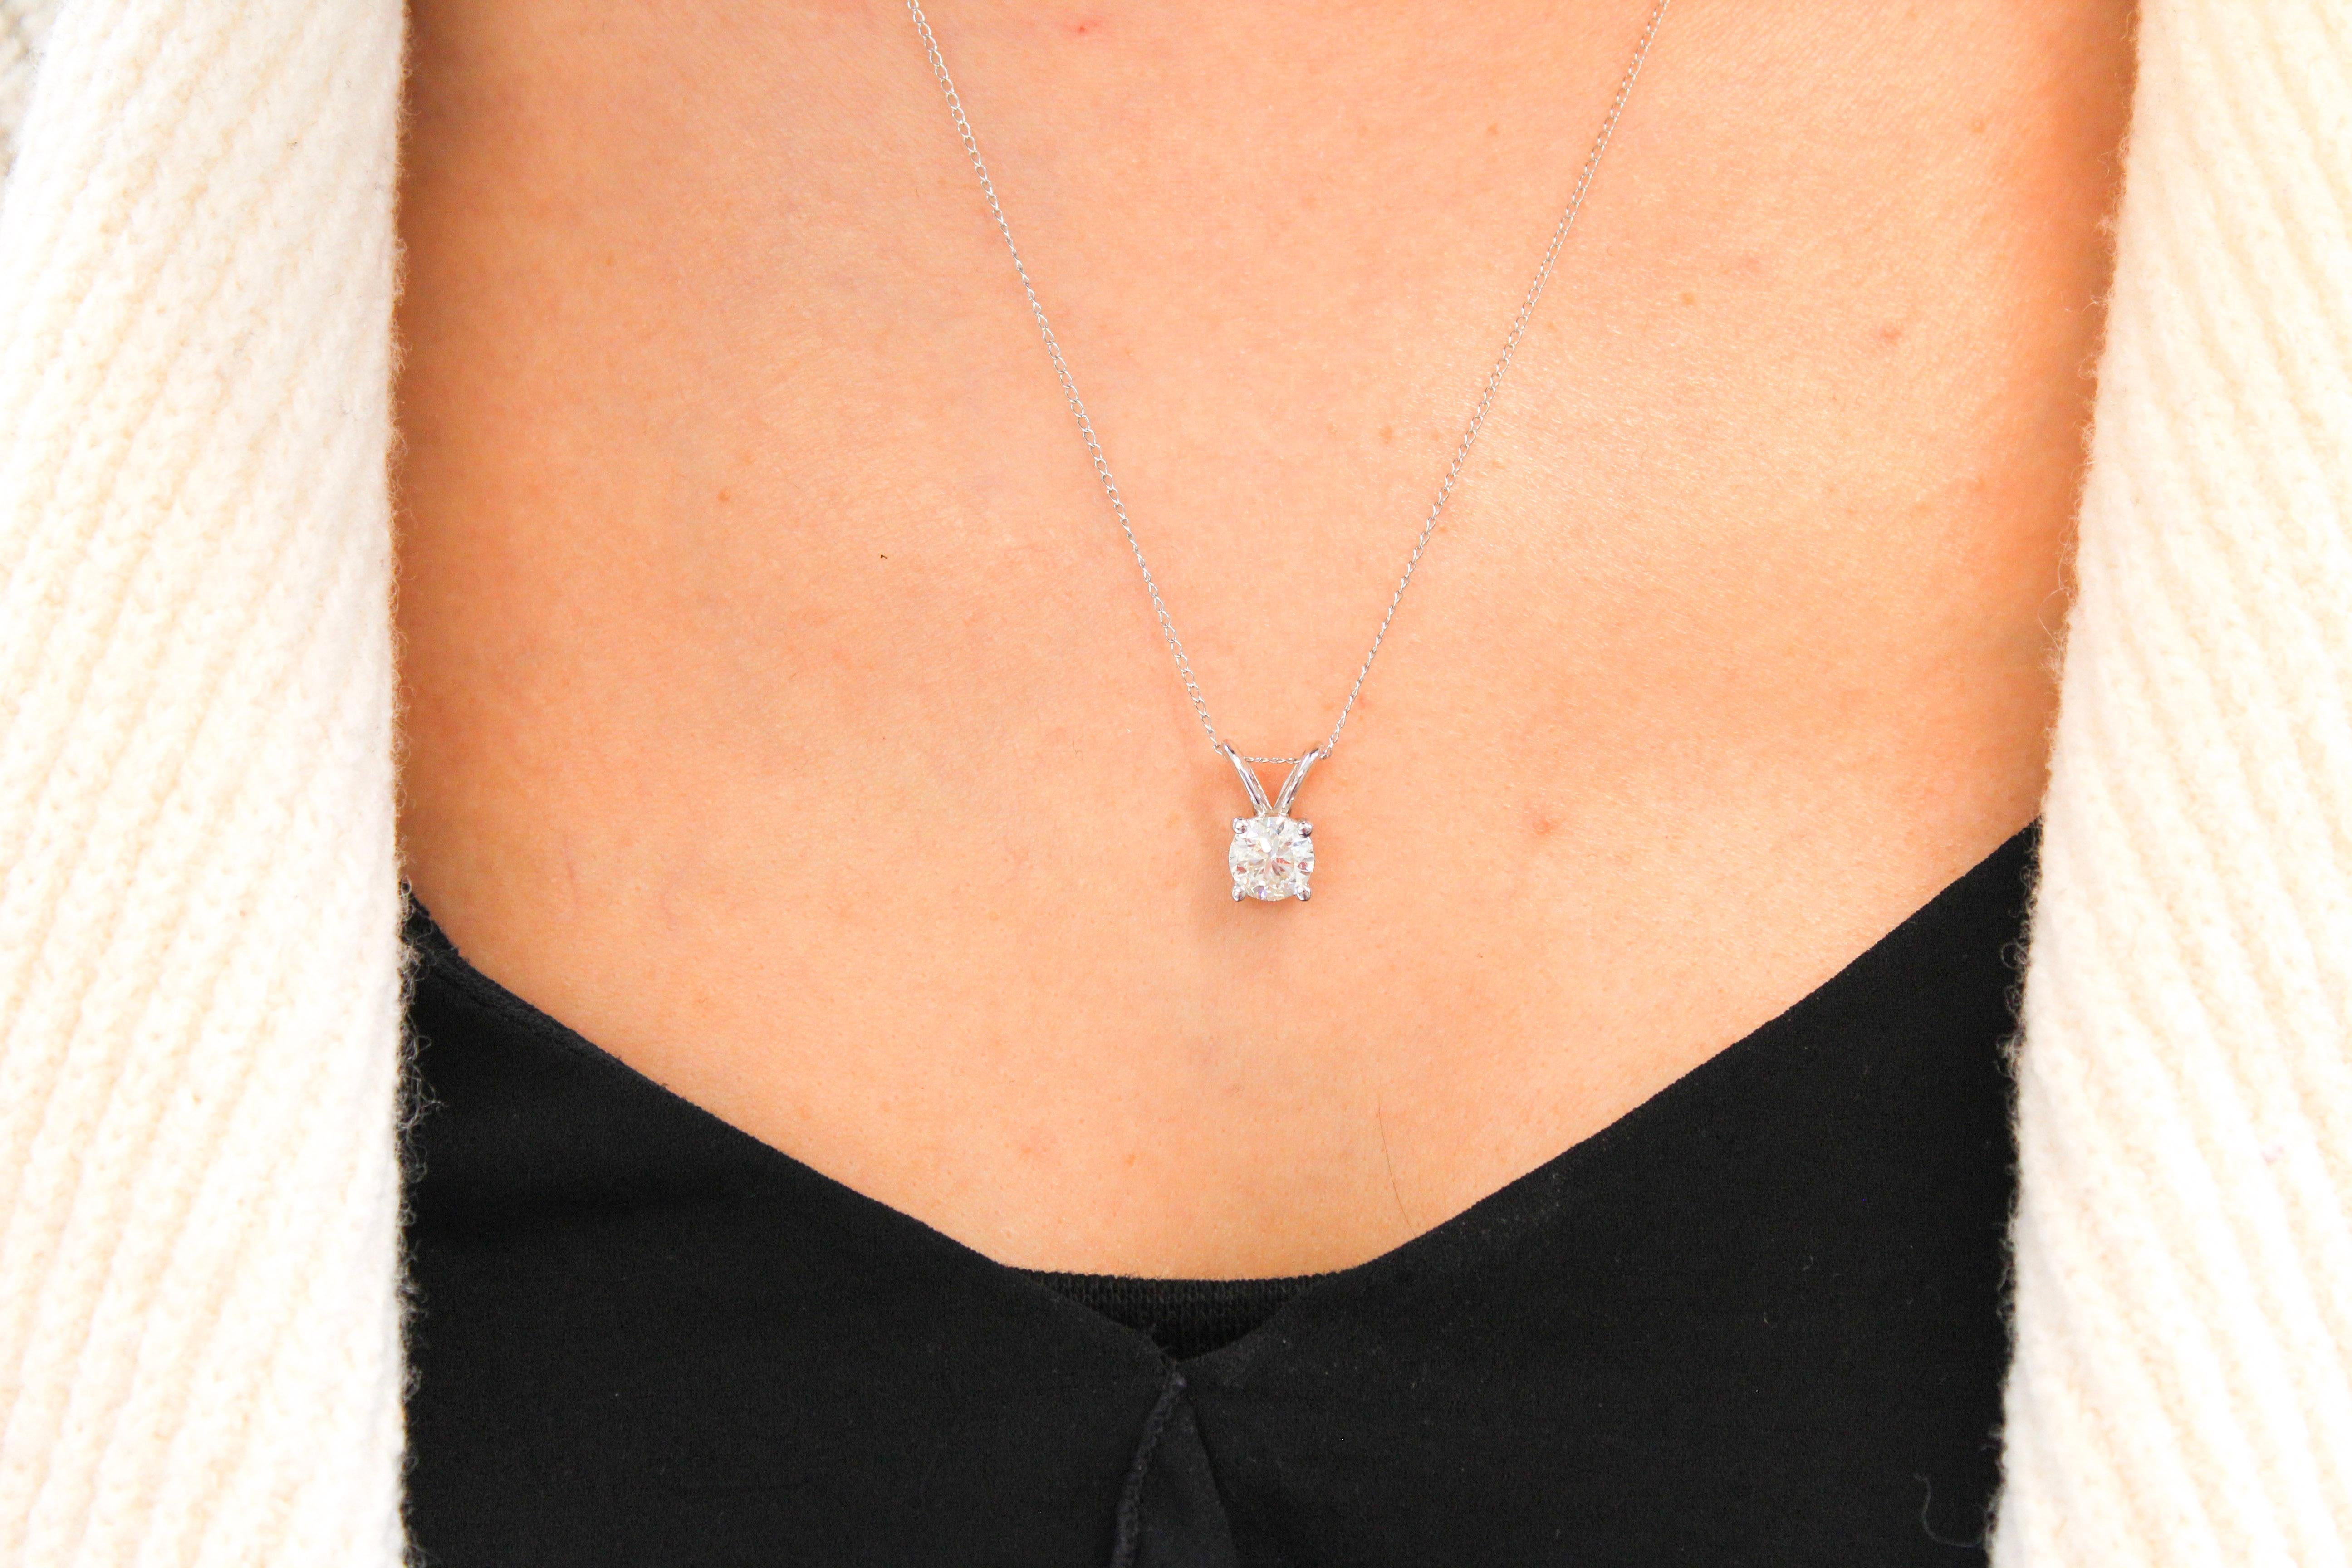 This impressive diamond solitaire pendant is finely crafted in brightly polished 14 karat white gold and features a round shaped 0.60 carat diamond that has I1 clarity, gracefully prong set on a shiny split bail. Ideal as an anniversary or birthday